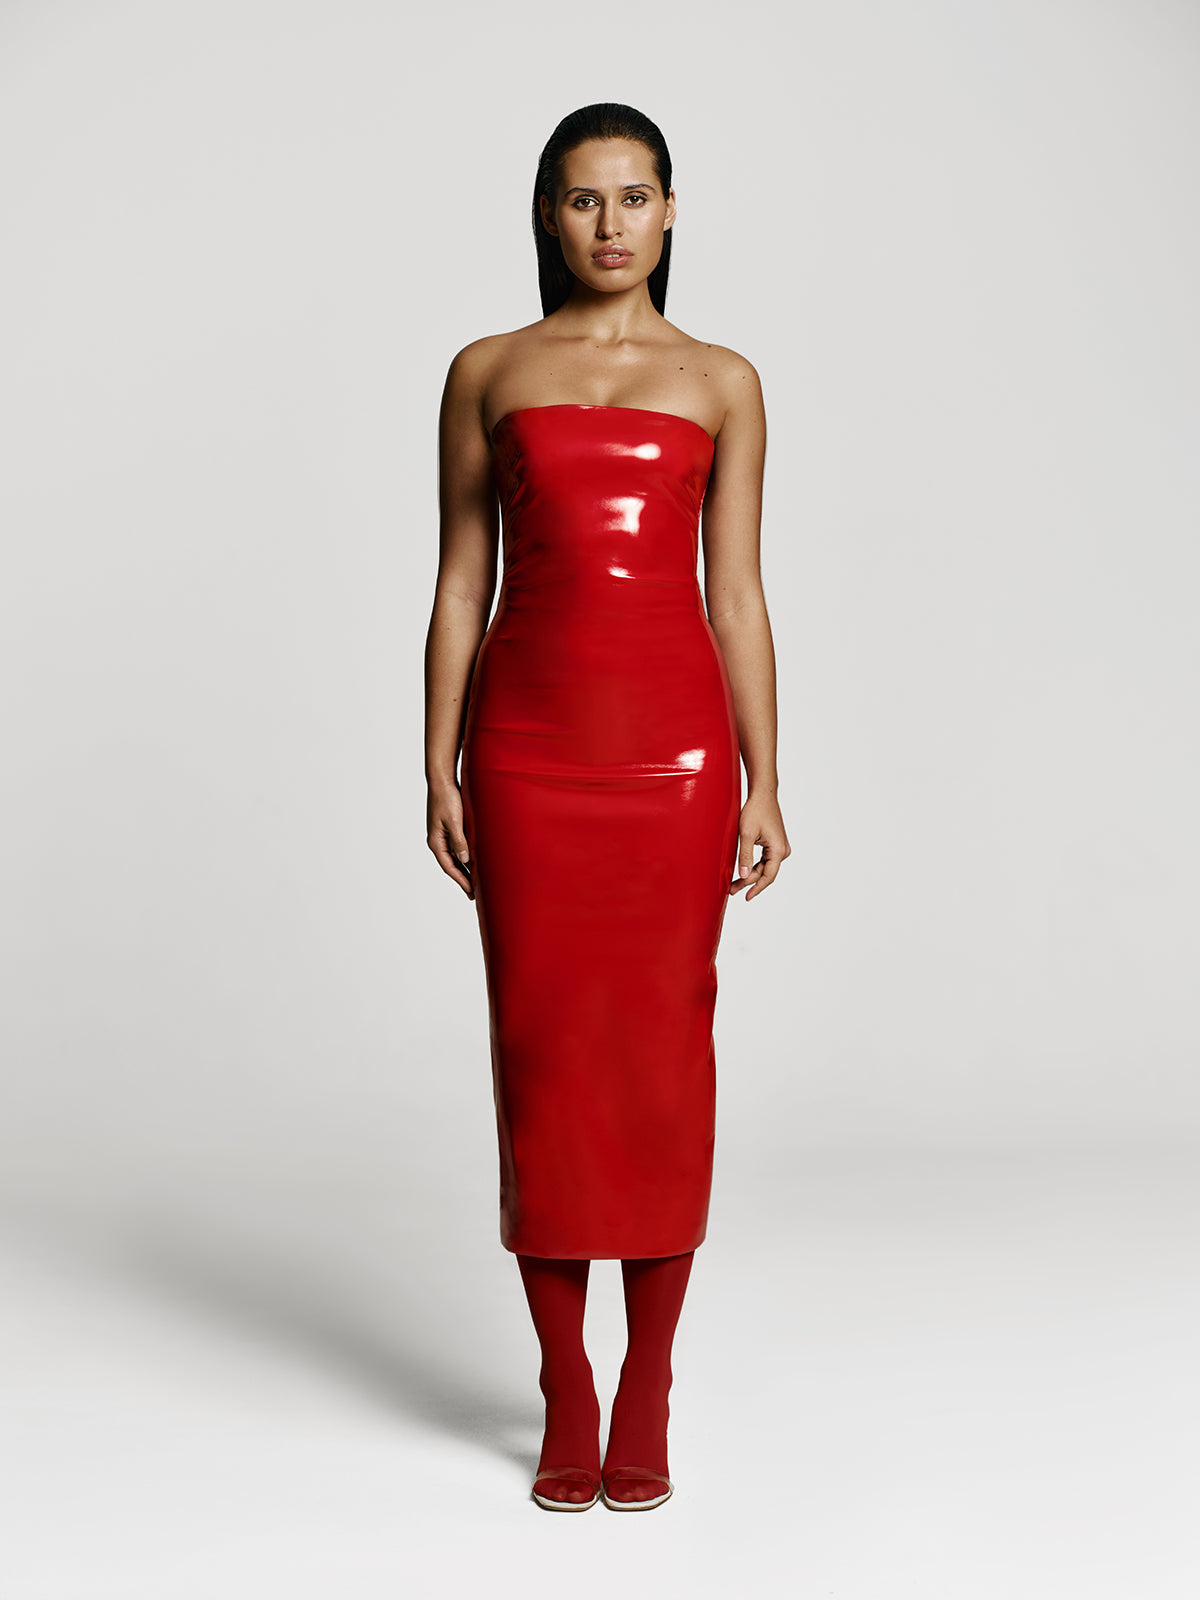 Girl in red leather dress